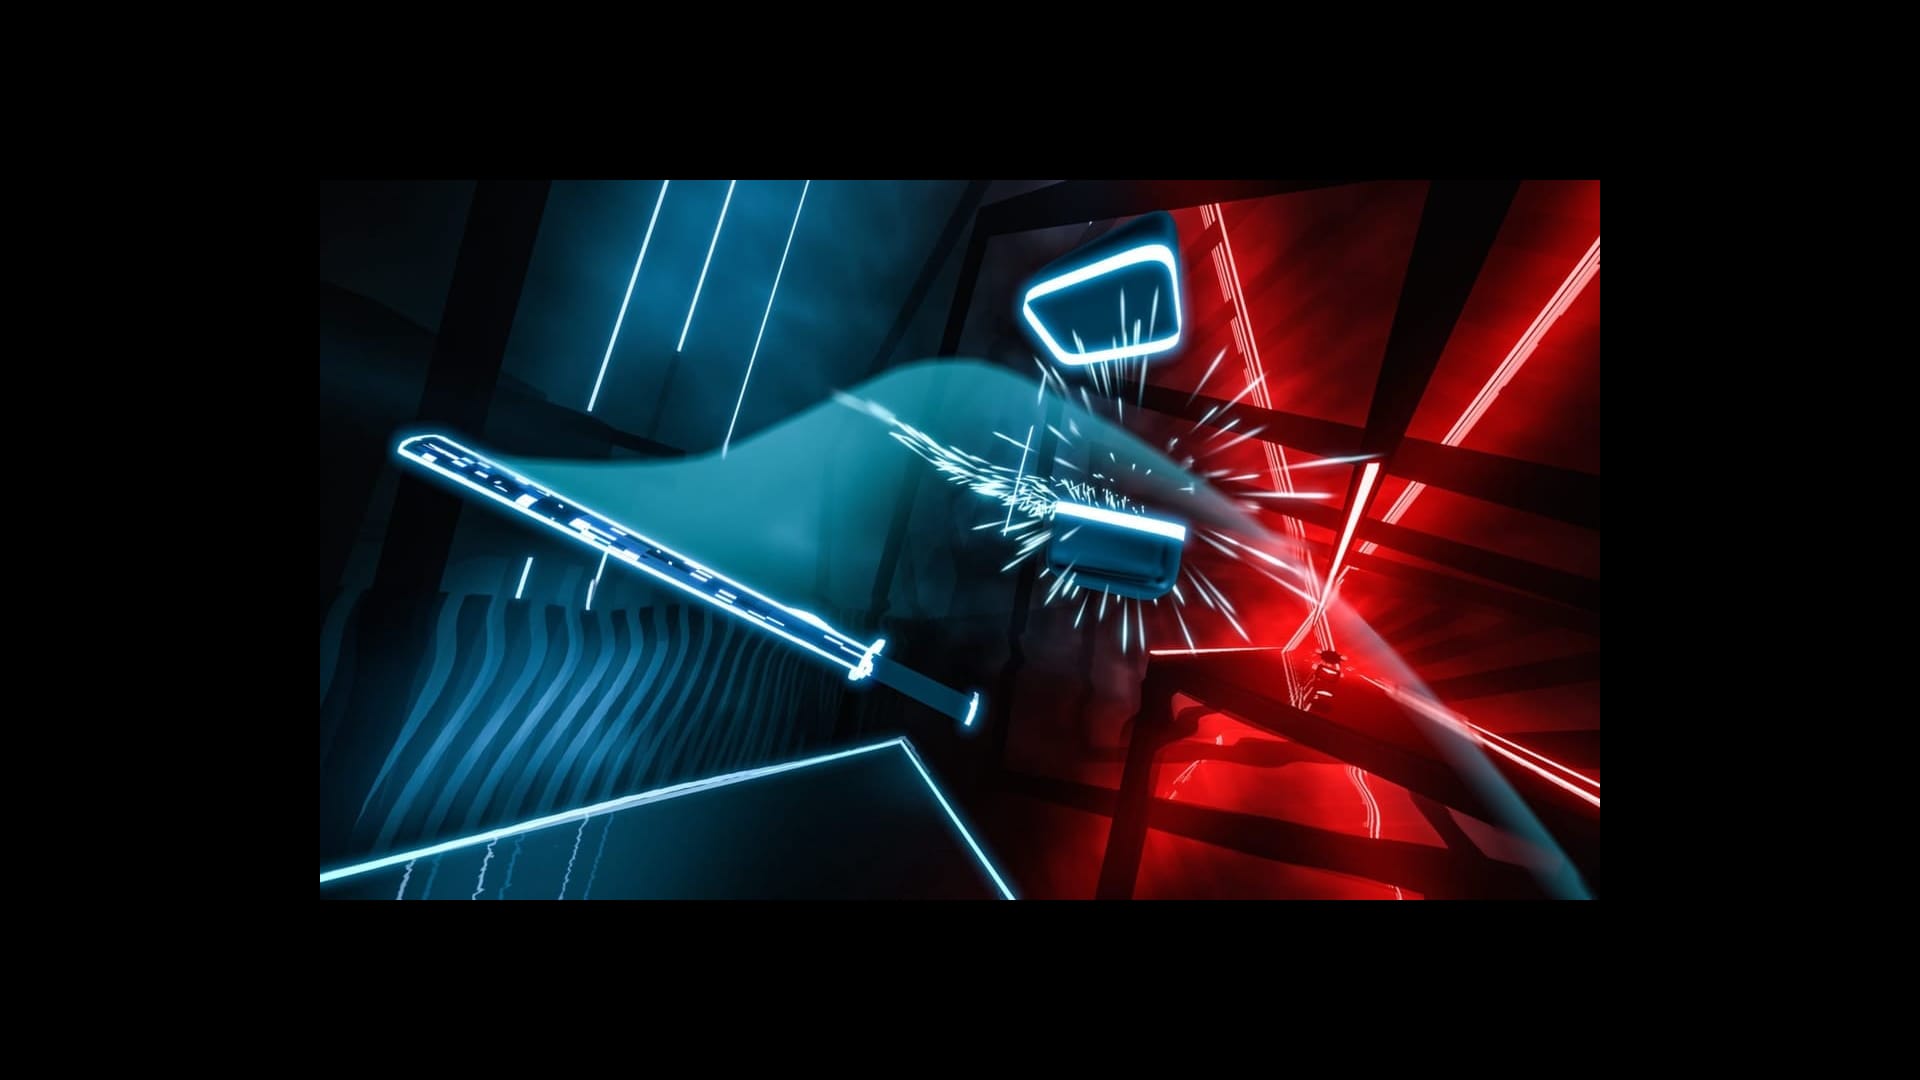 Juice feudale klarhed Beat Saber Release Date Announced, Price Increase and Level Editor Arriving  | TechRaptor